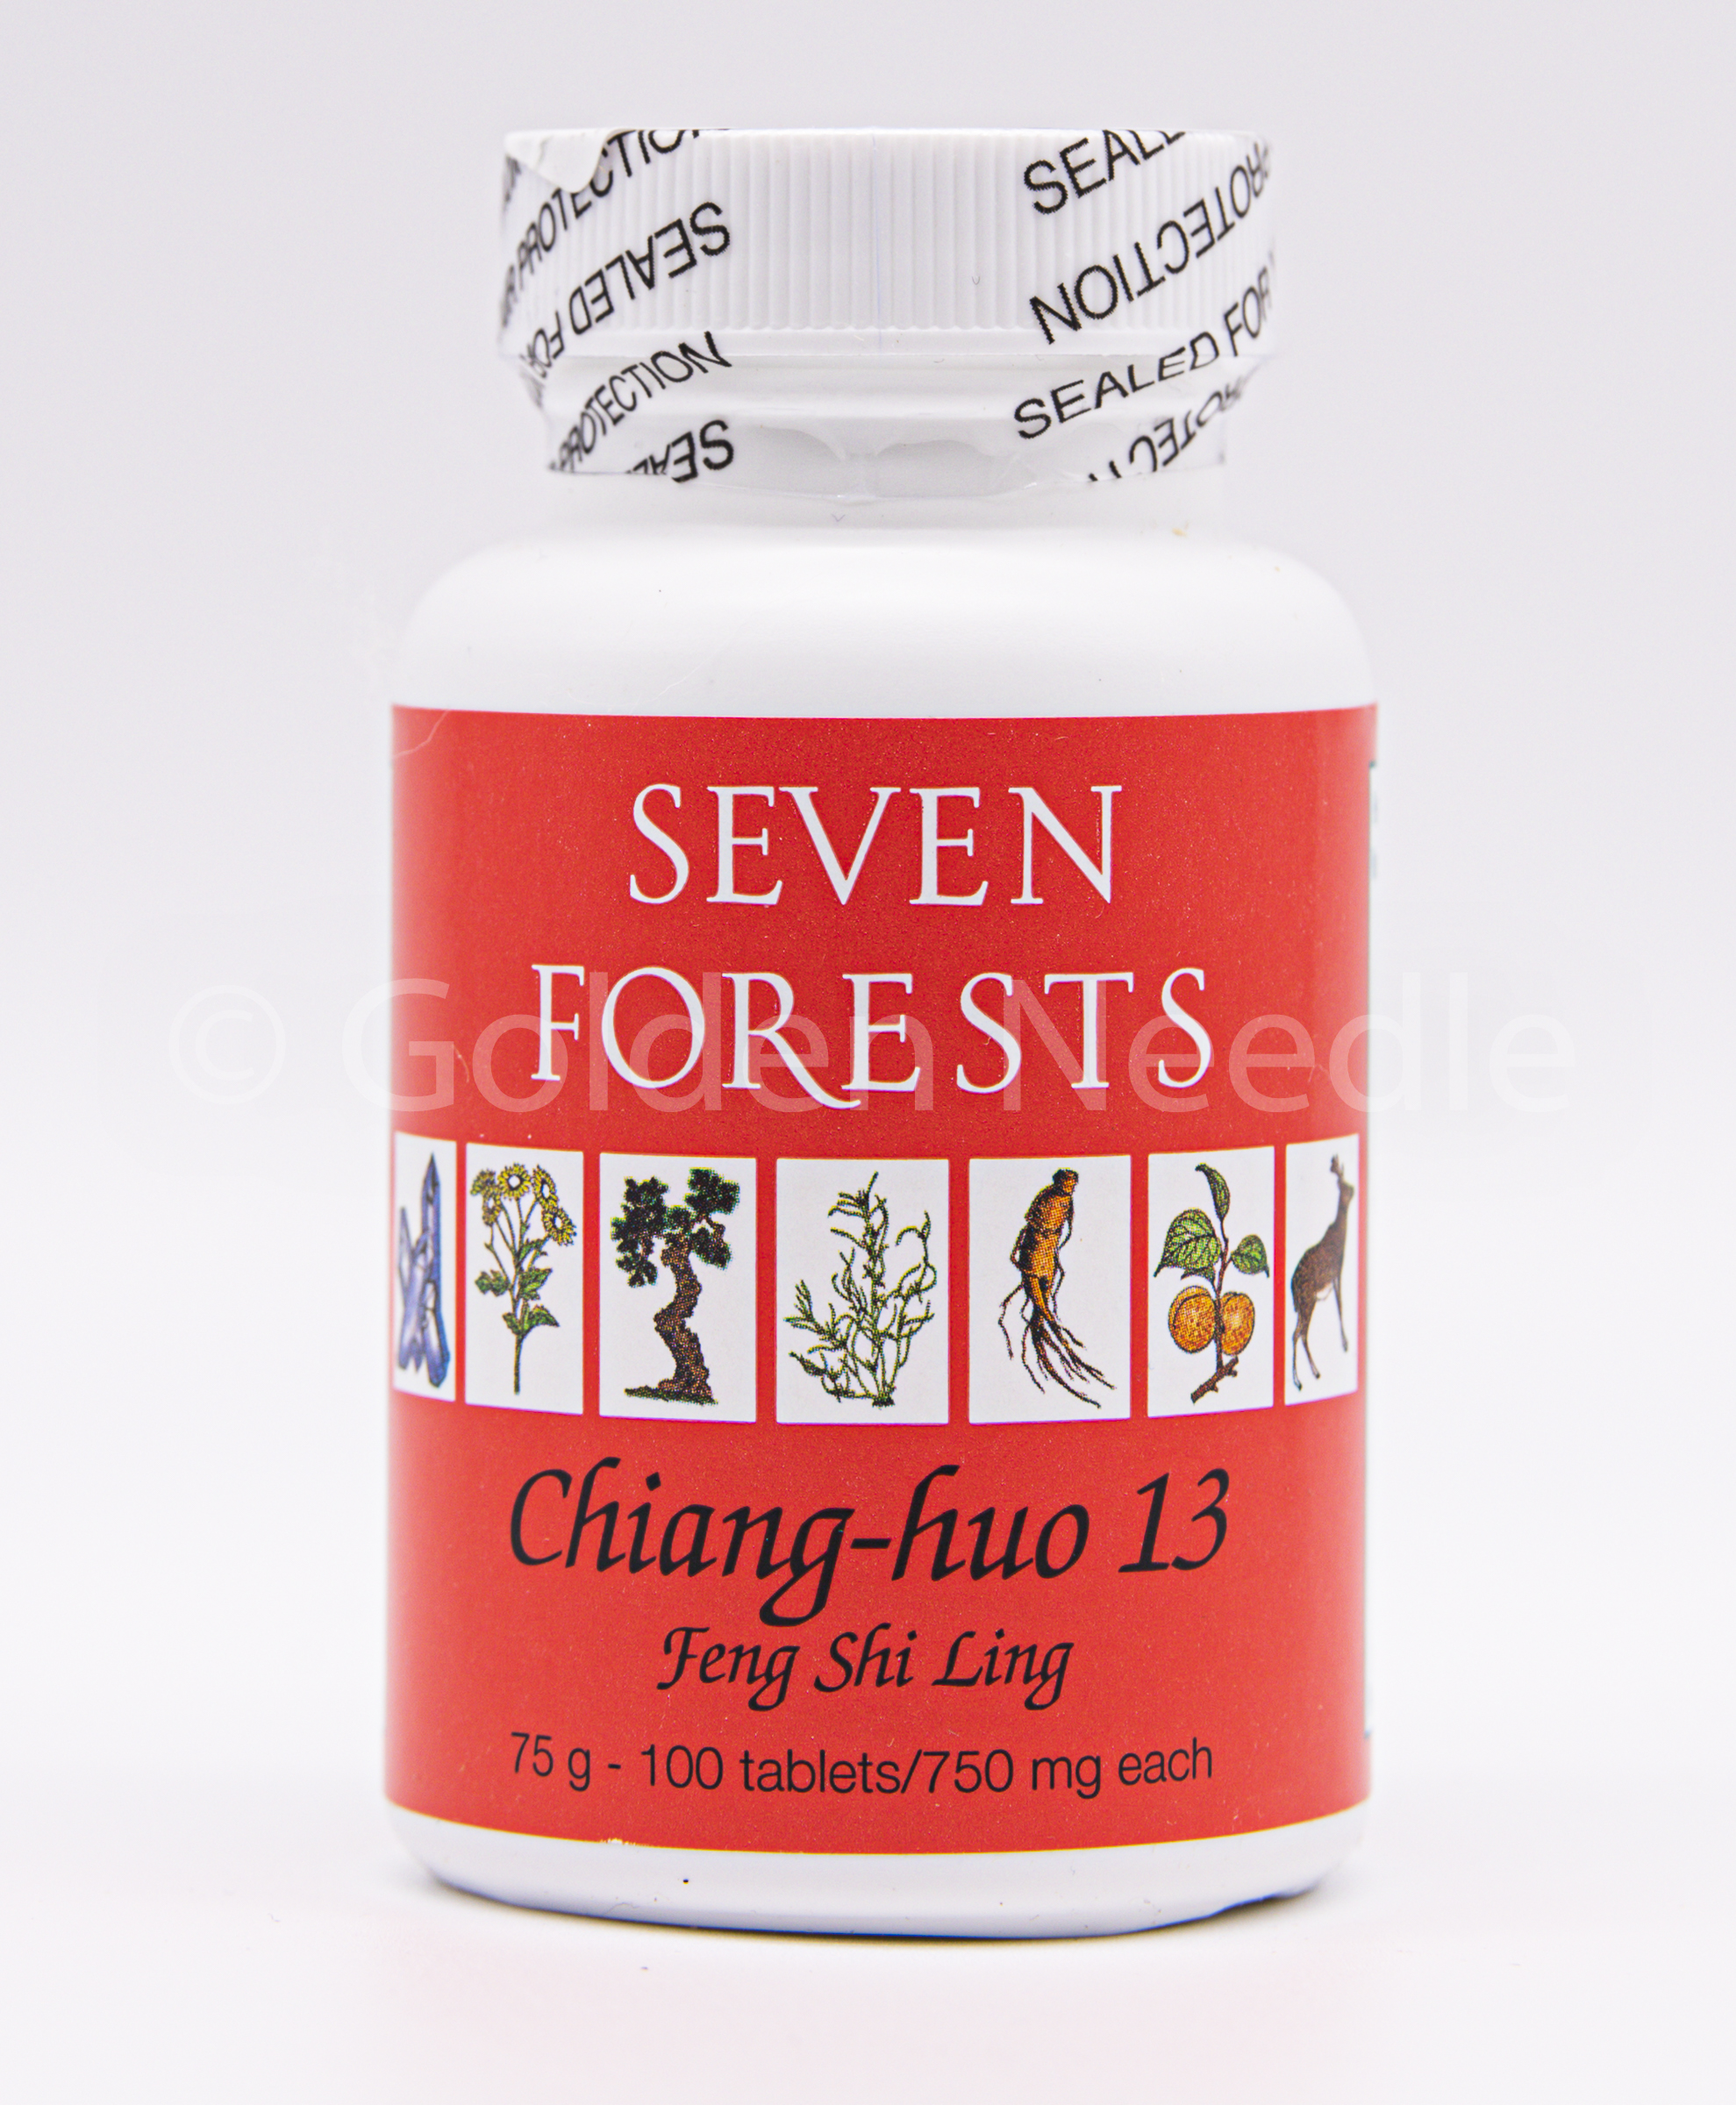 Chiang-huo 13, 100 tablets